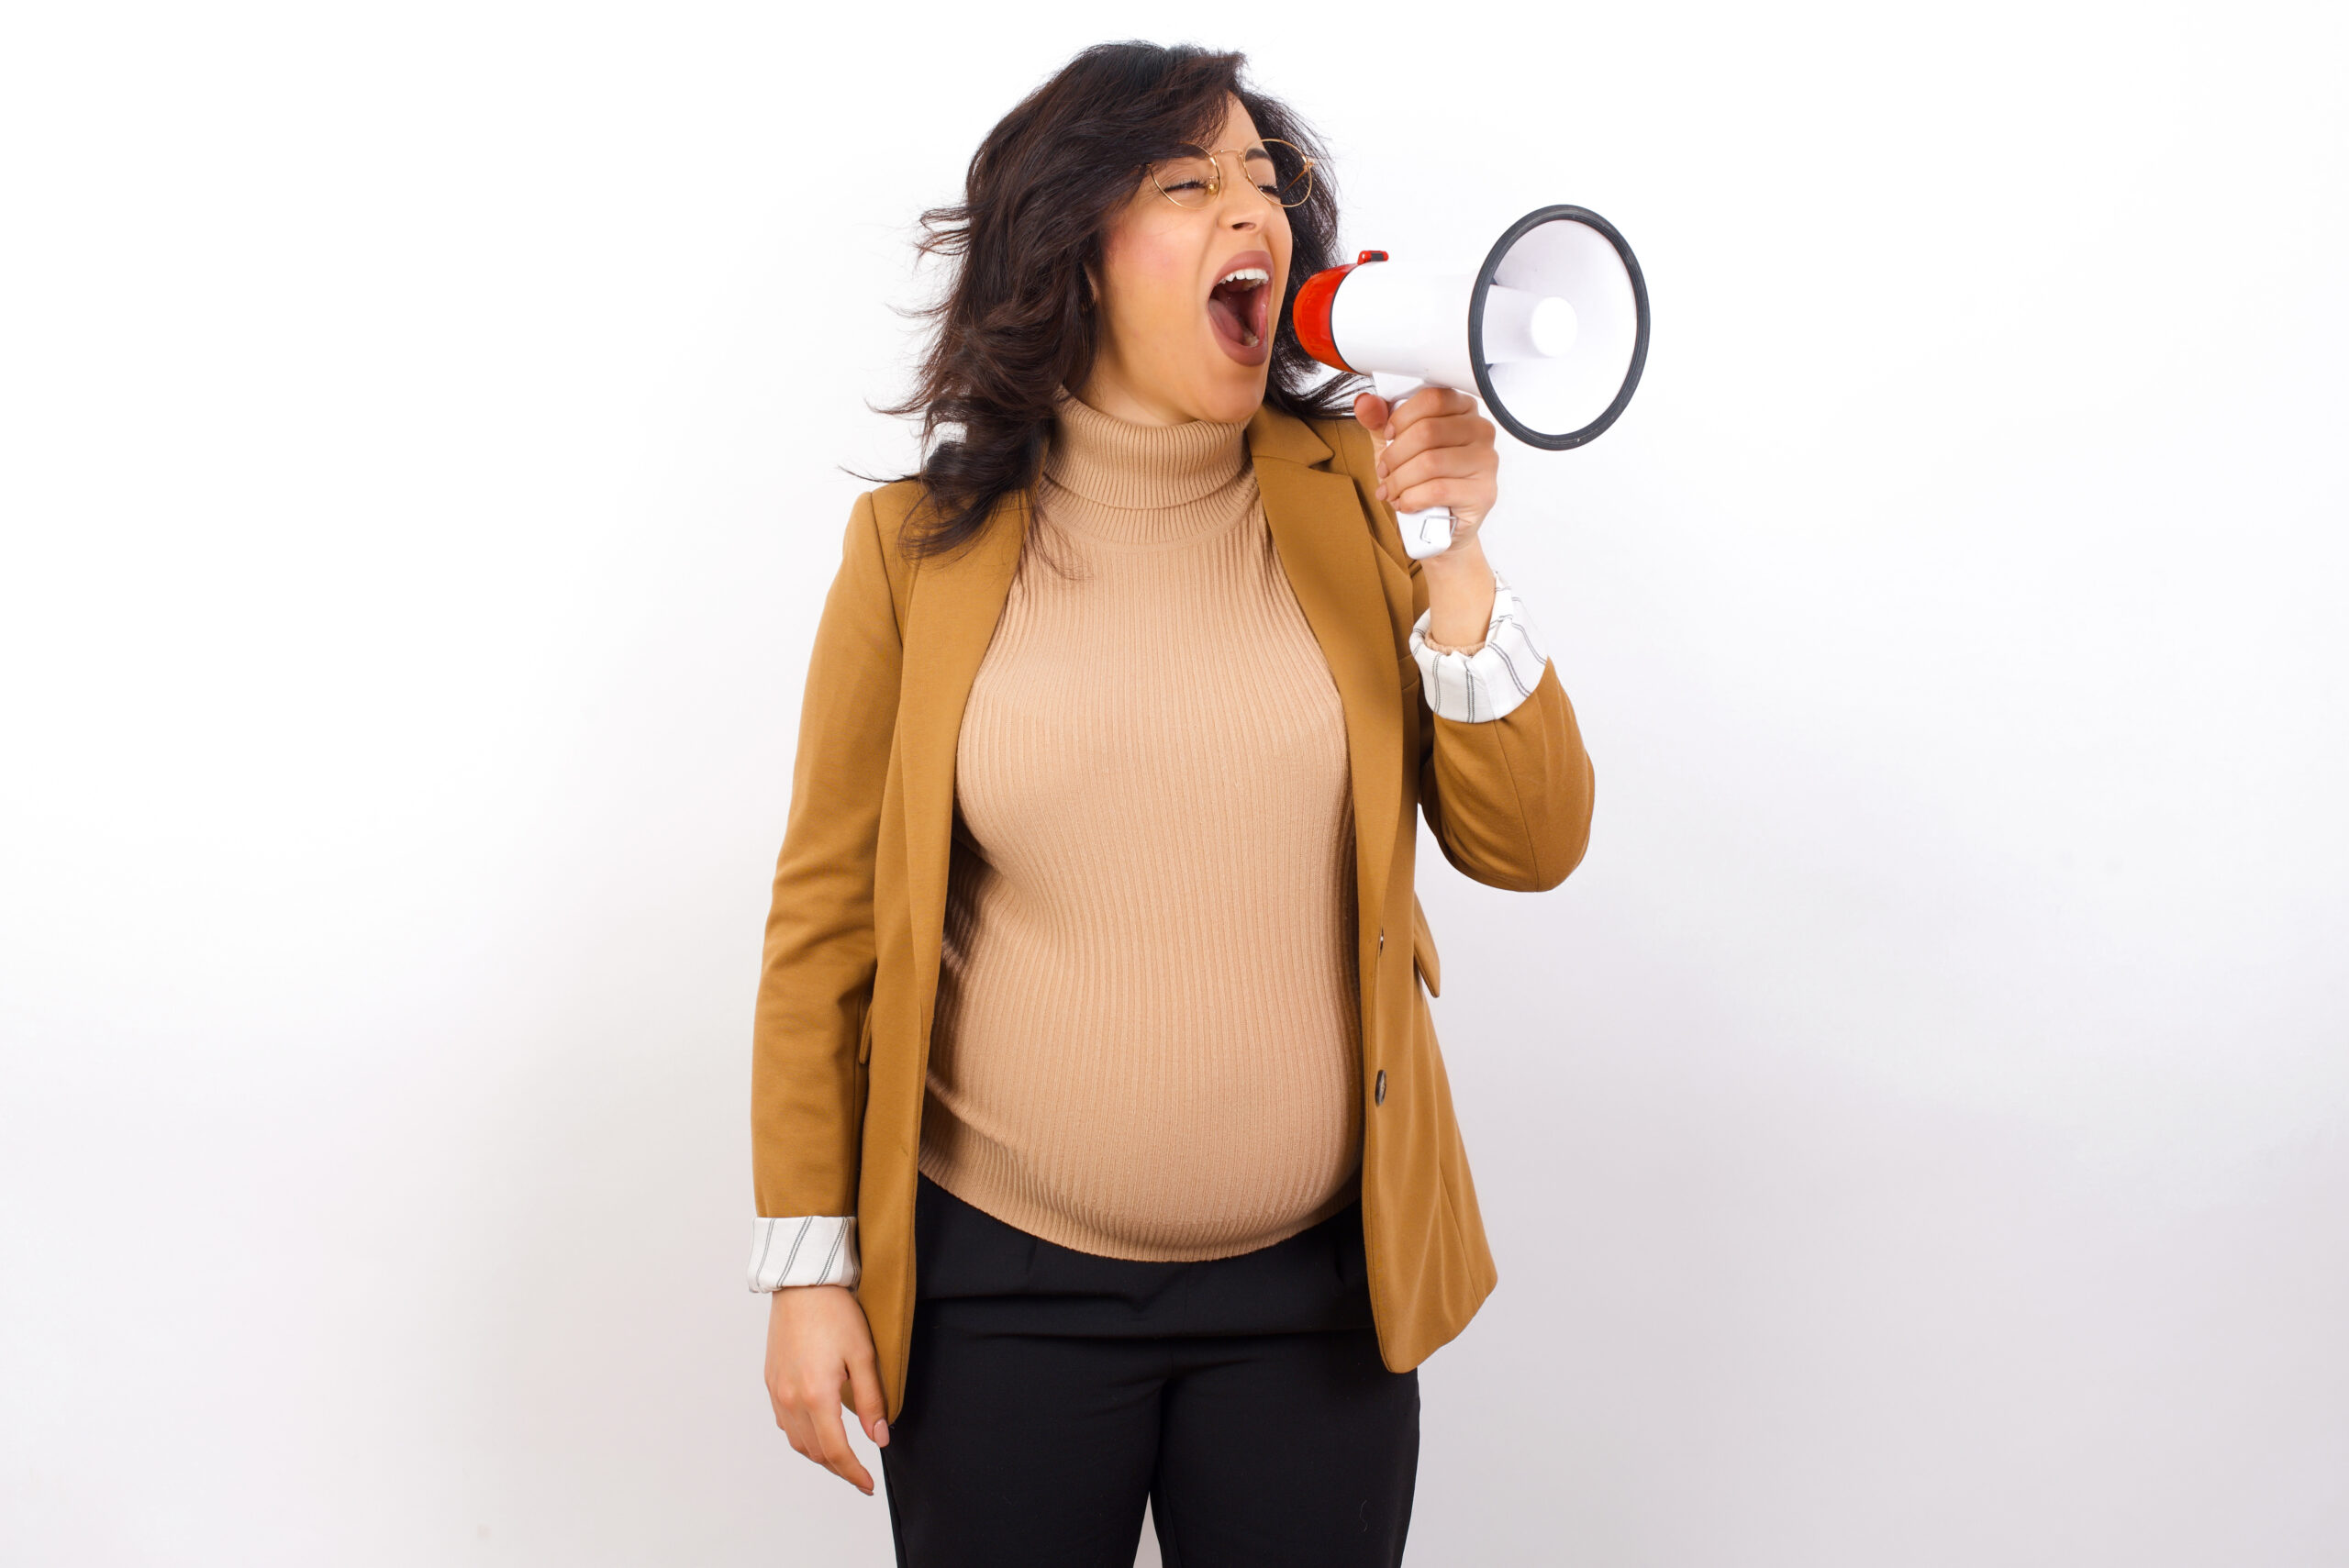 Pregnant person holds a megaphone and speaks loudly into it.